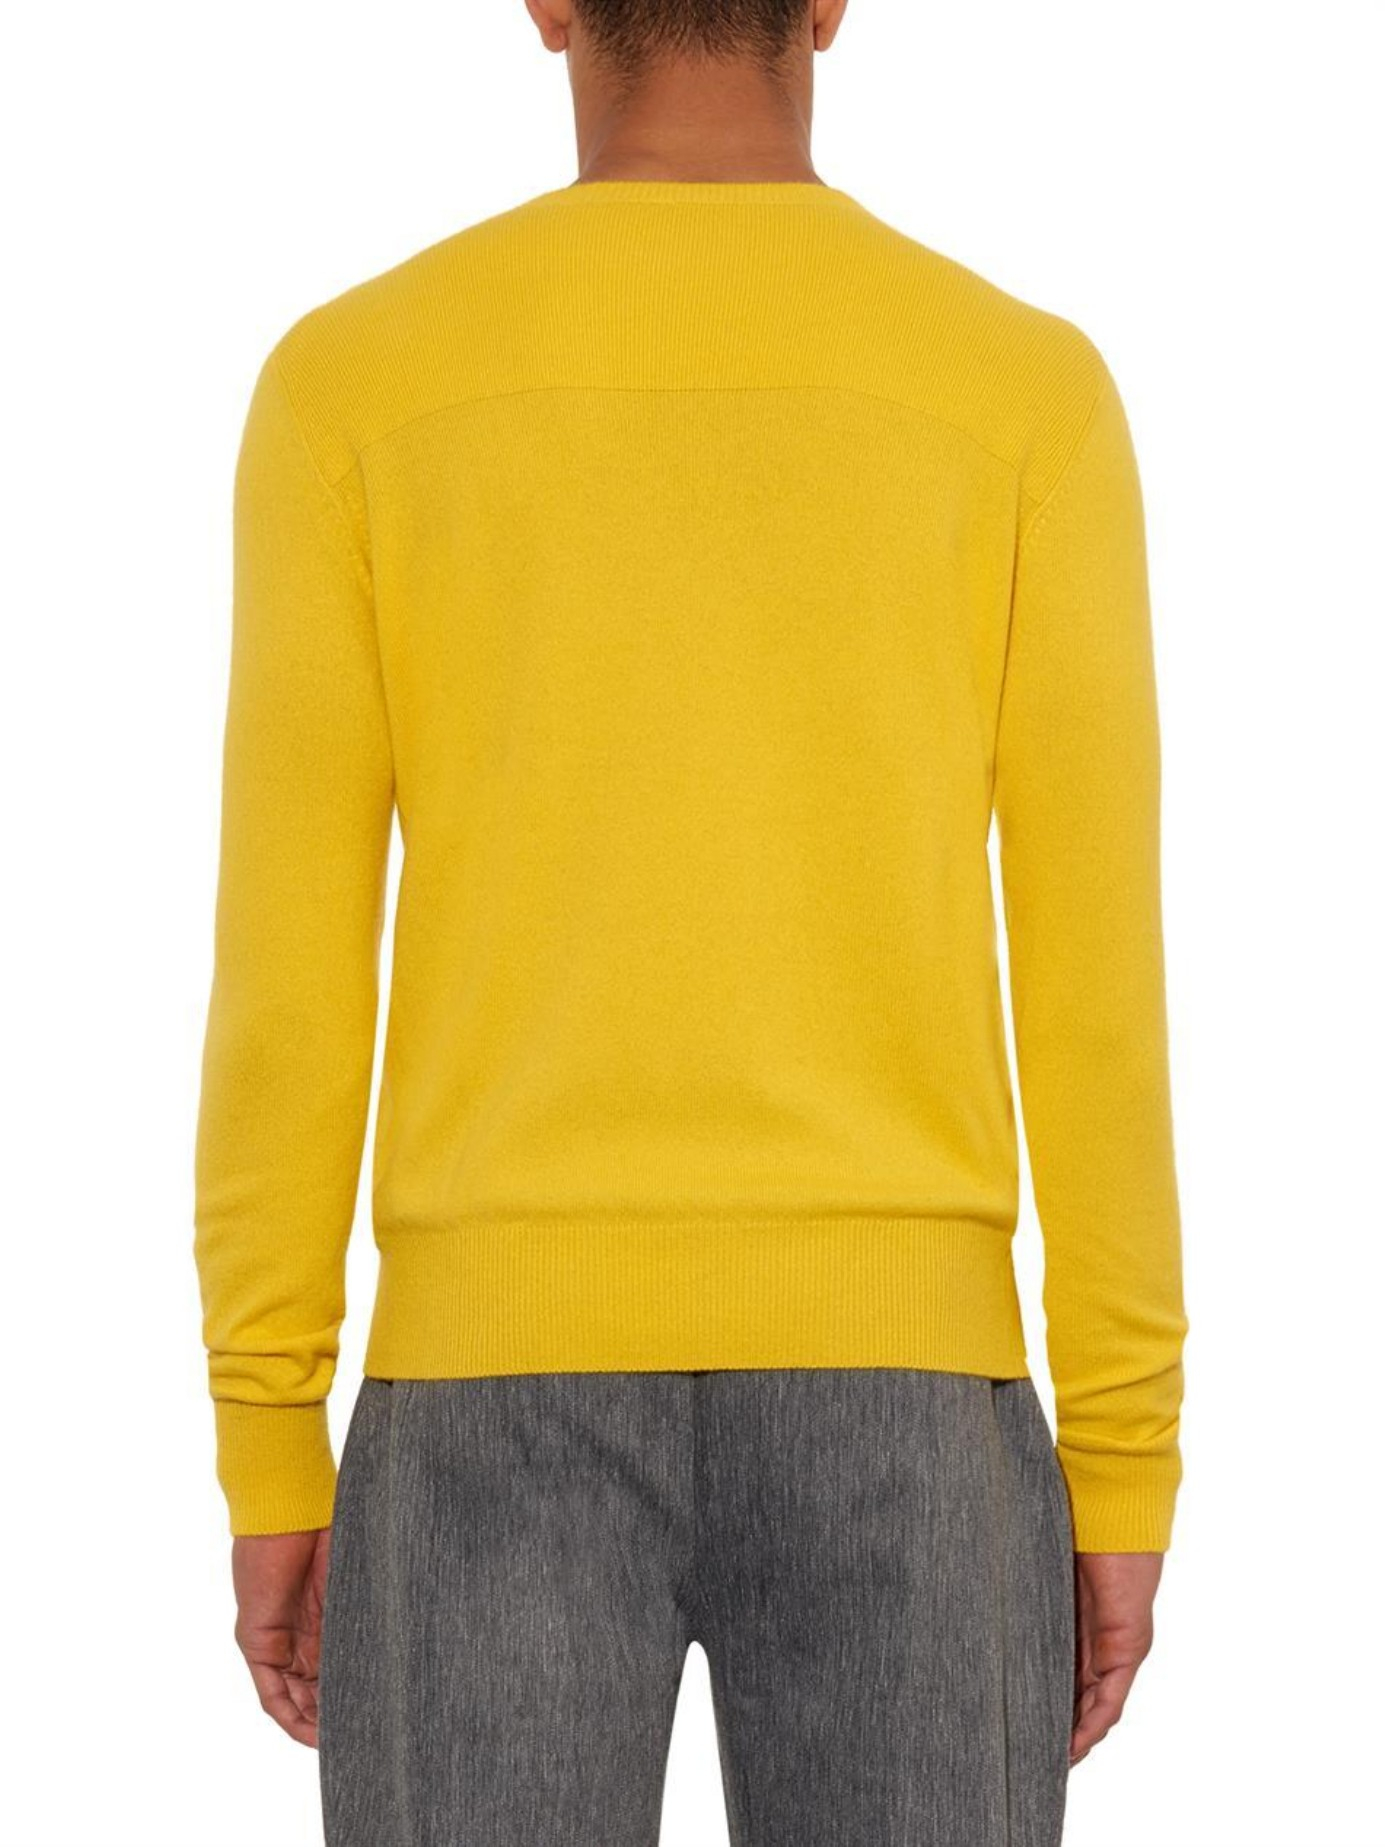 Raey Classic Crew-Neck Cashmere Sweater in Yellow for Men | Lyst